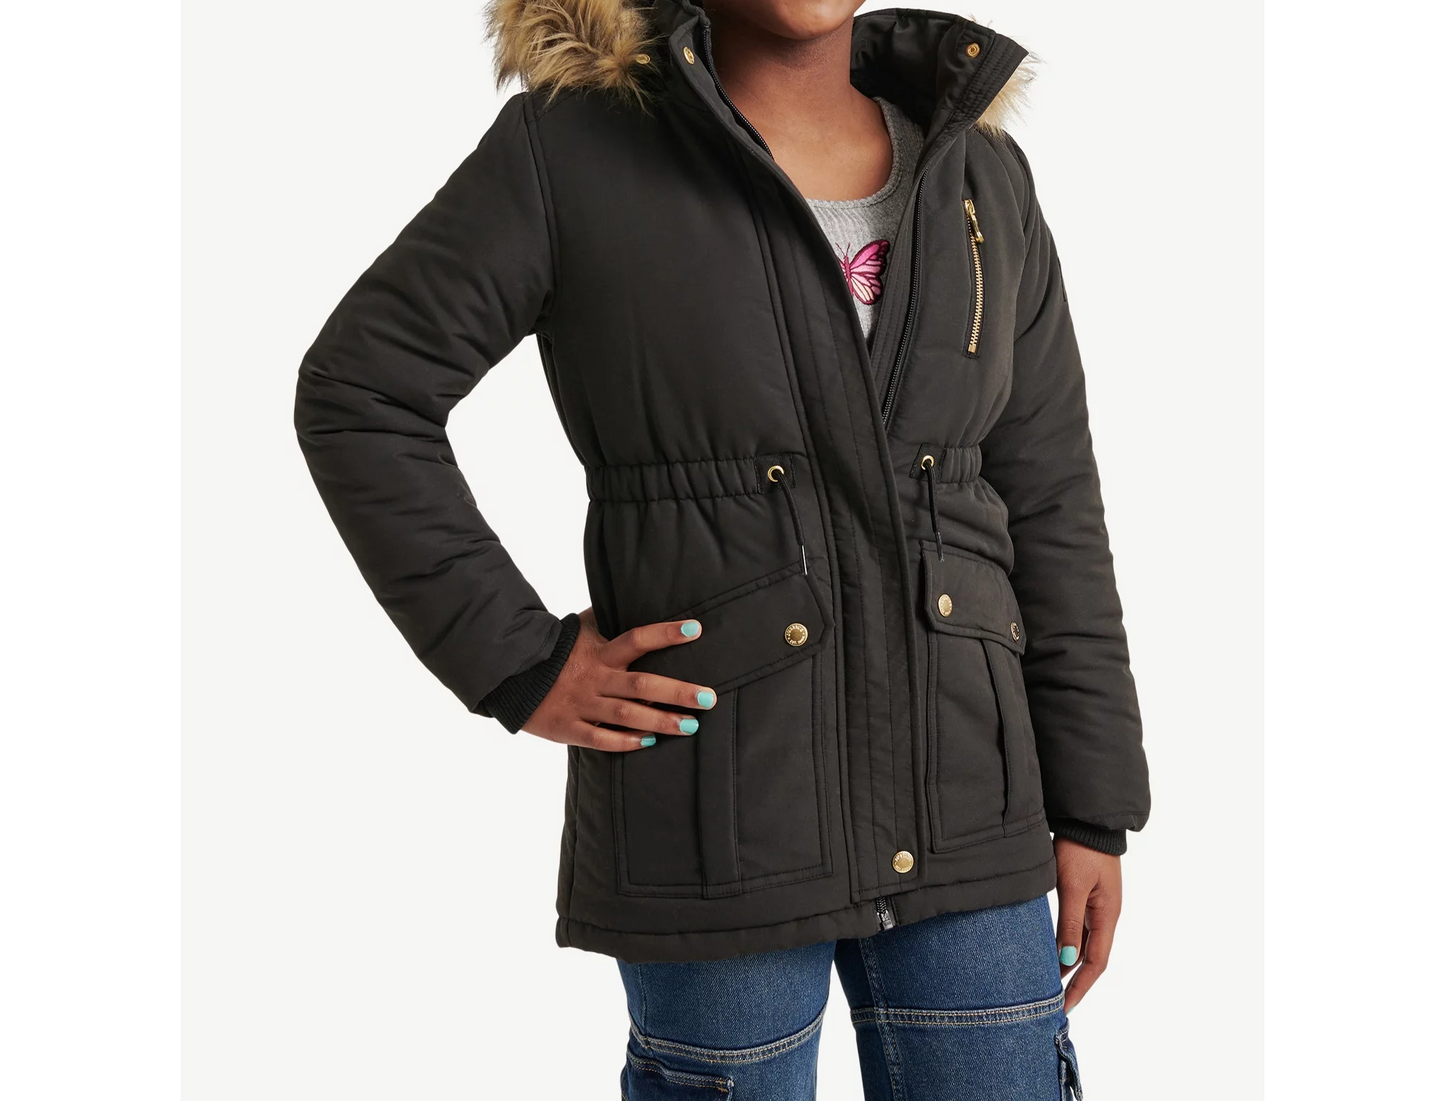 Girls Fashionable Front Zipper Padded Jacket with Hood